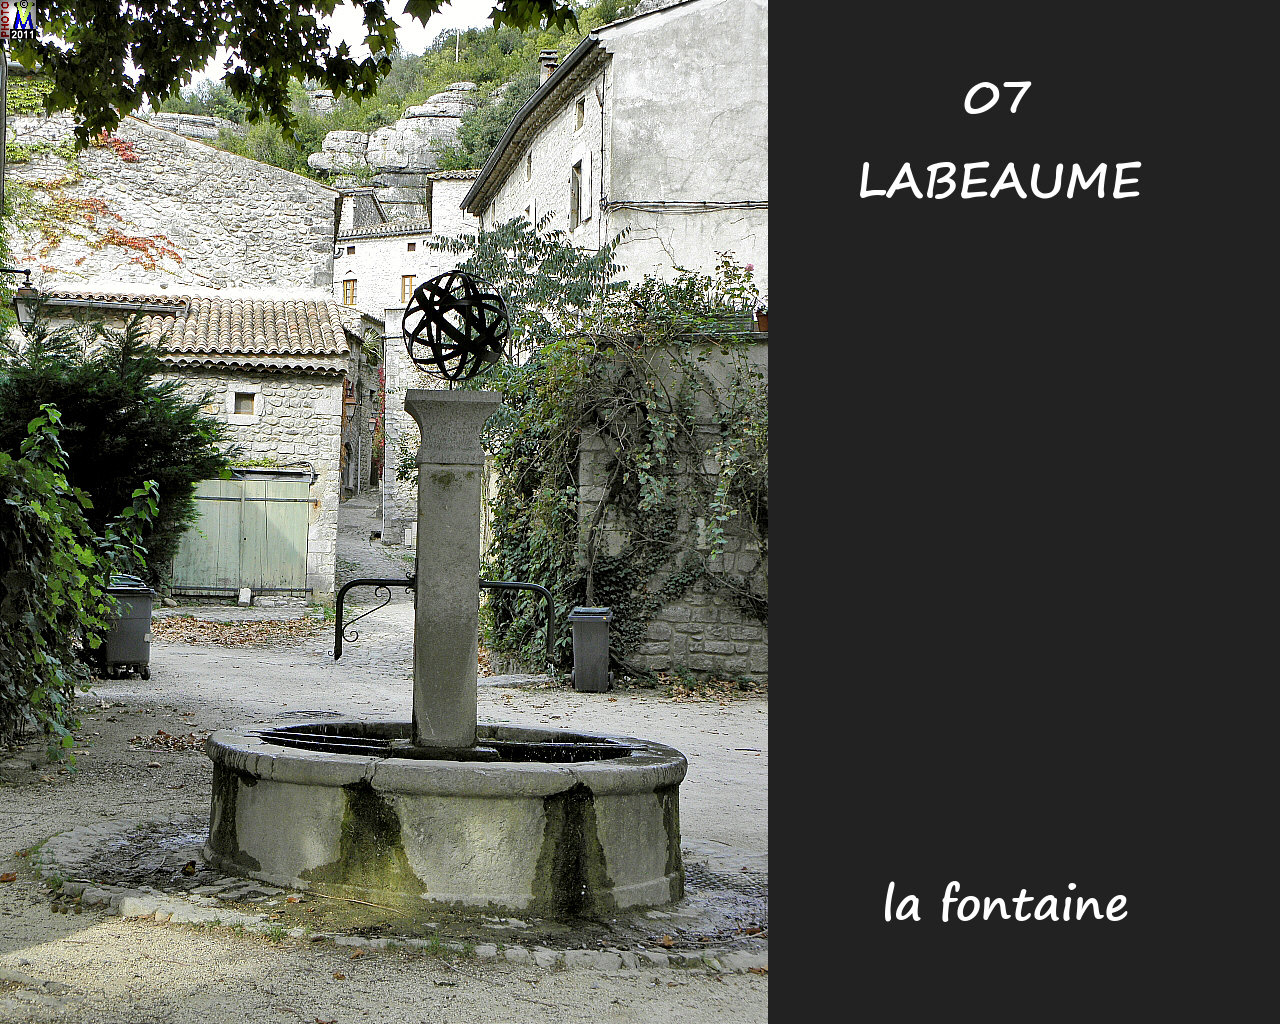 07LABEAUME_fontaine_100.jpg